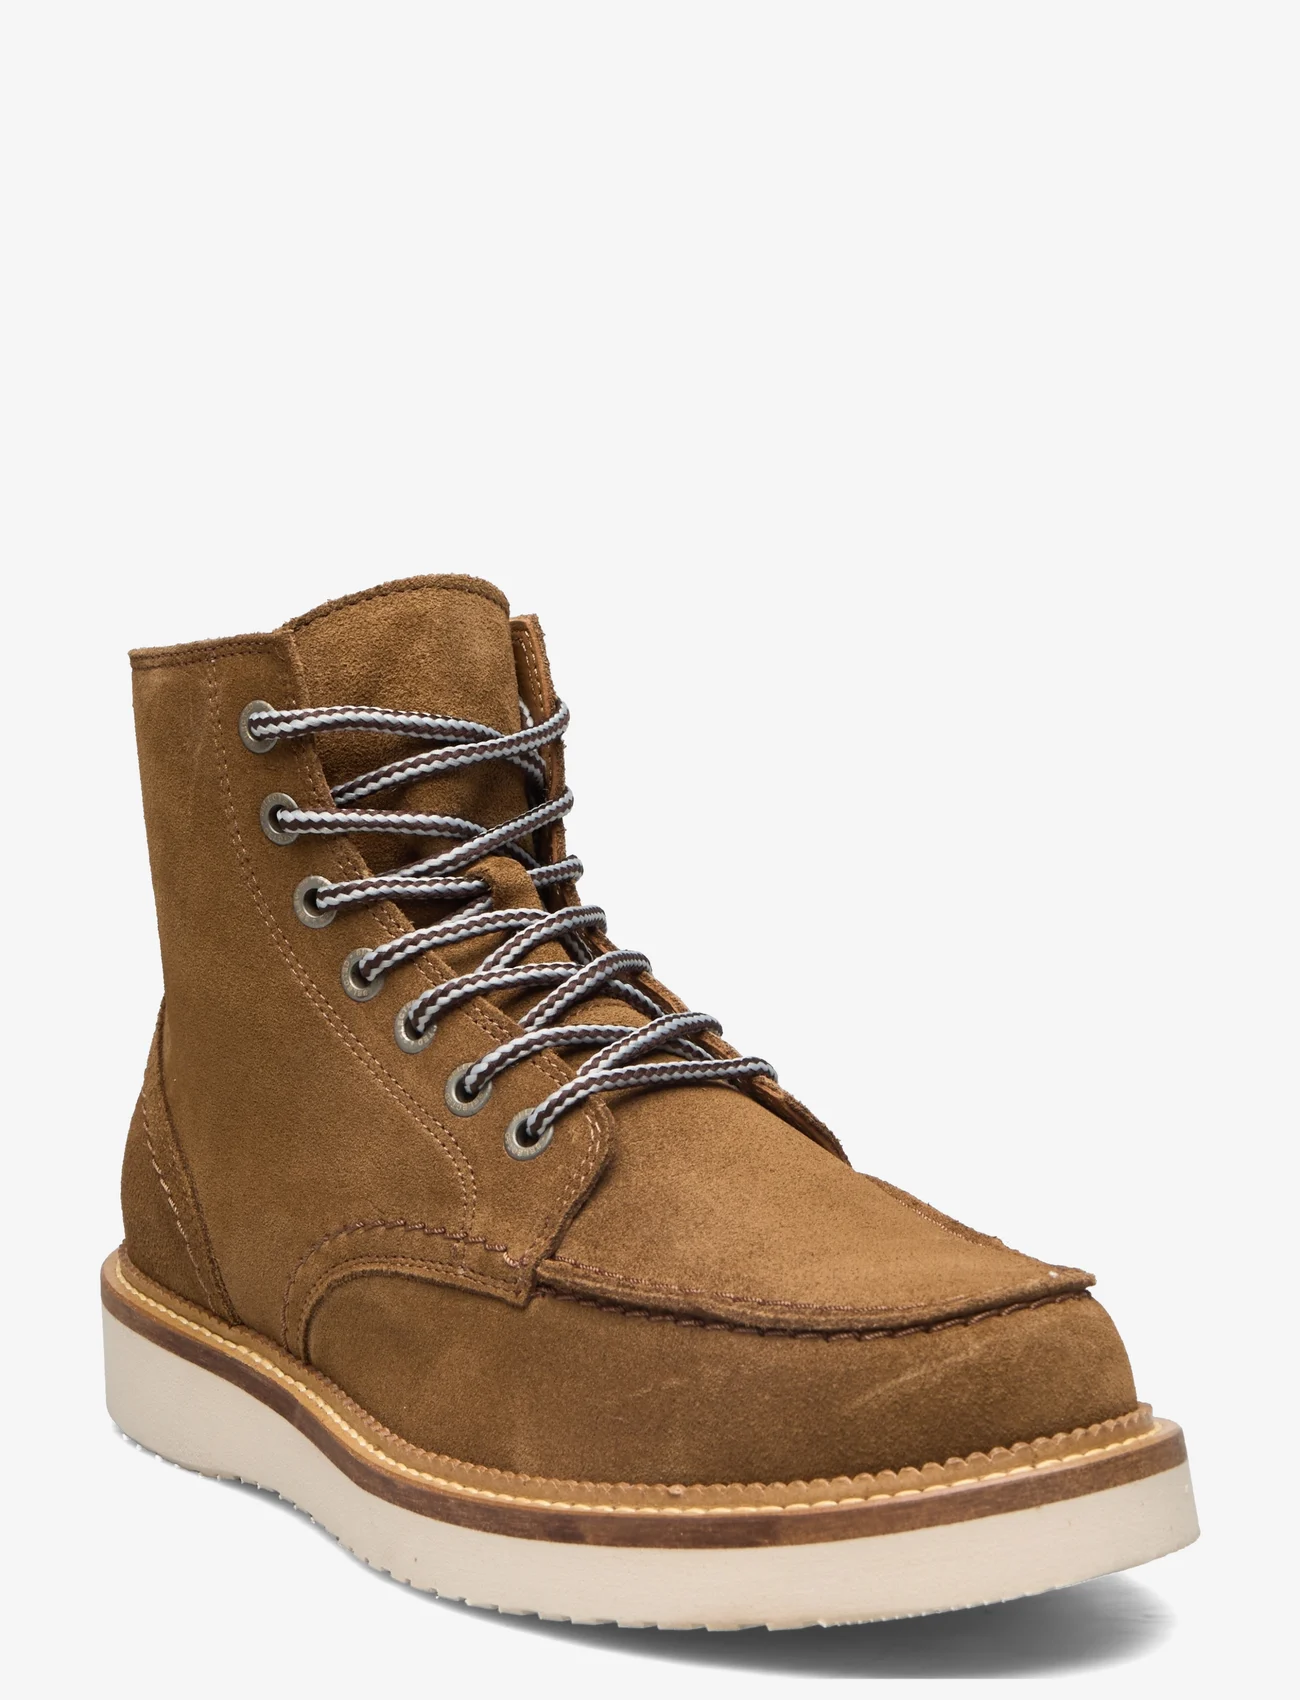 Selected Homme - SLHTEO NEW SUEDE MOC-TOE BOOT B - kängor med snörning - tobacco brown - 0